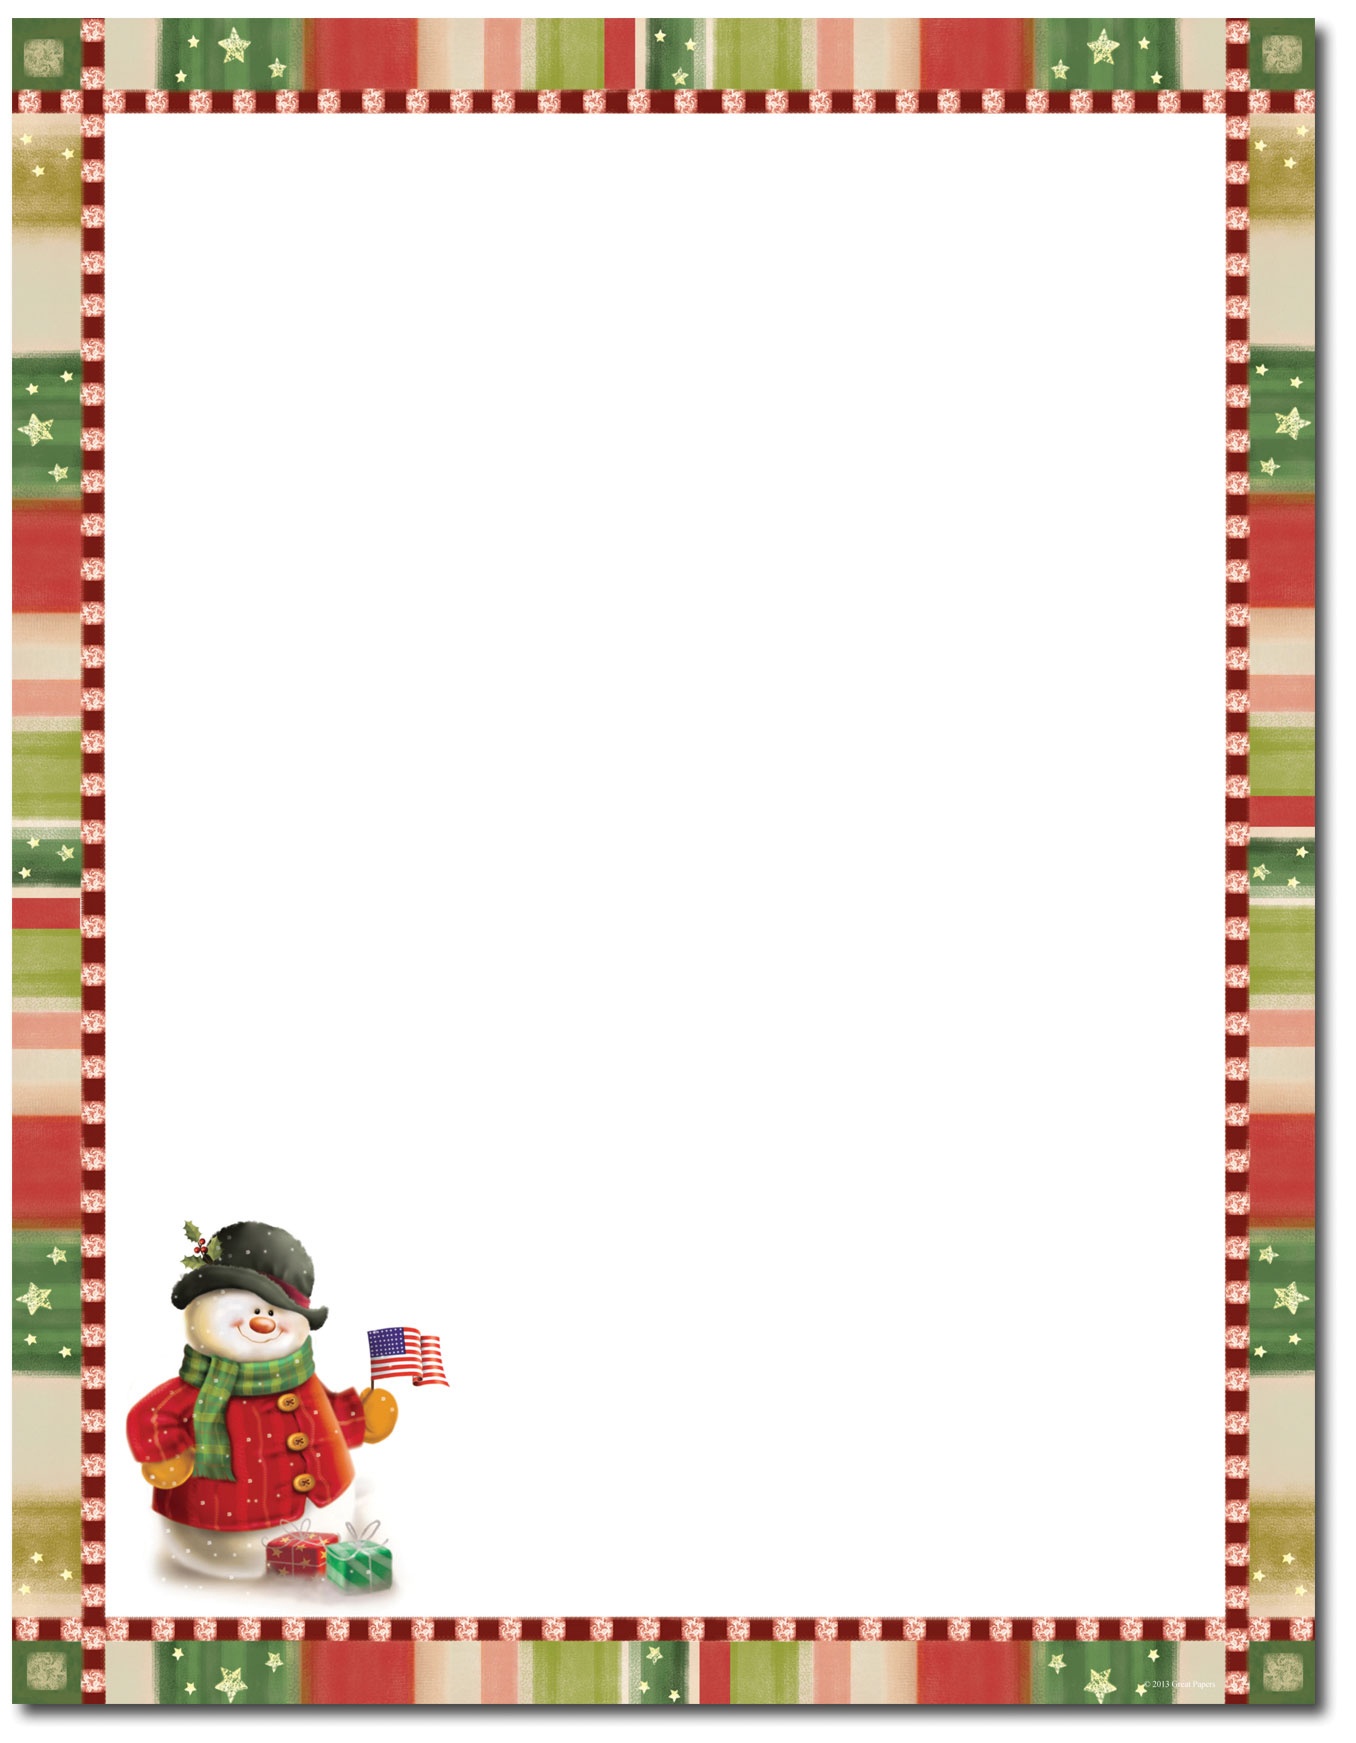 Free Christmas Stationary Cliparts, Download Free Clip Art, Free - Free Printable Christmas Paper With Borders